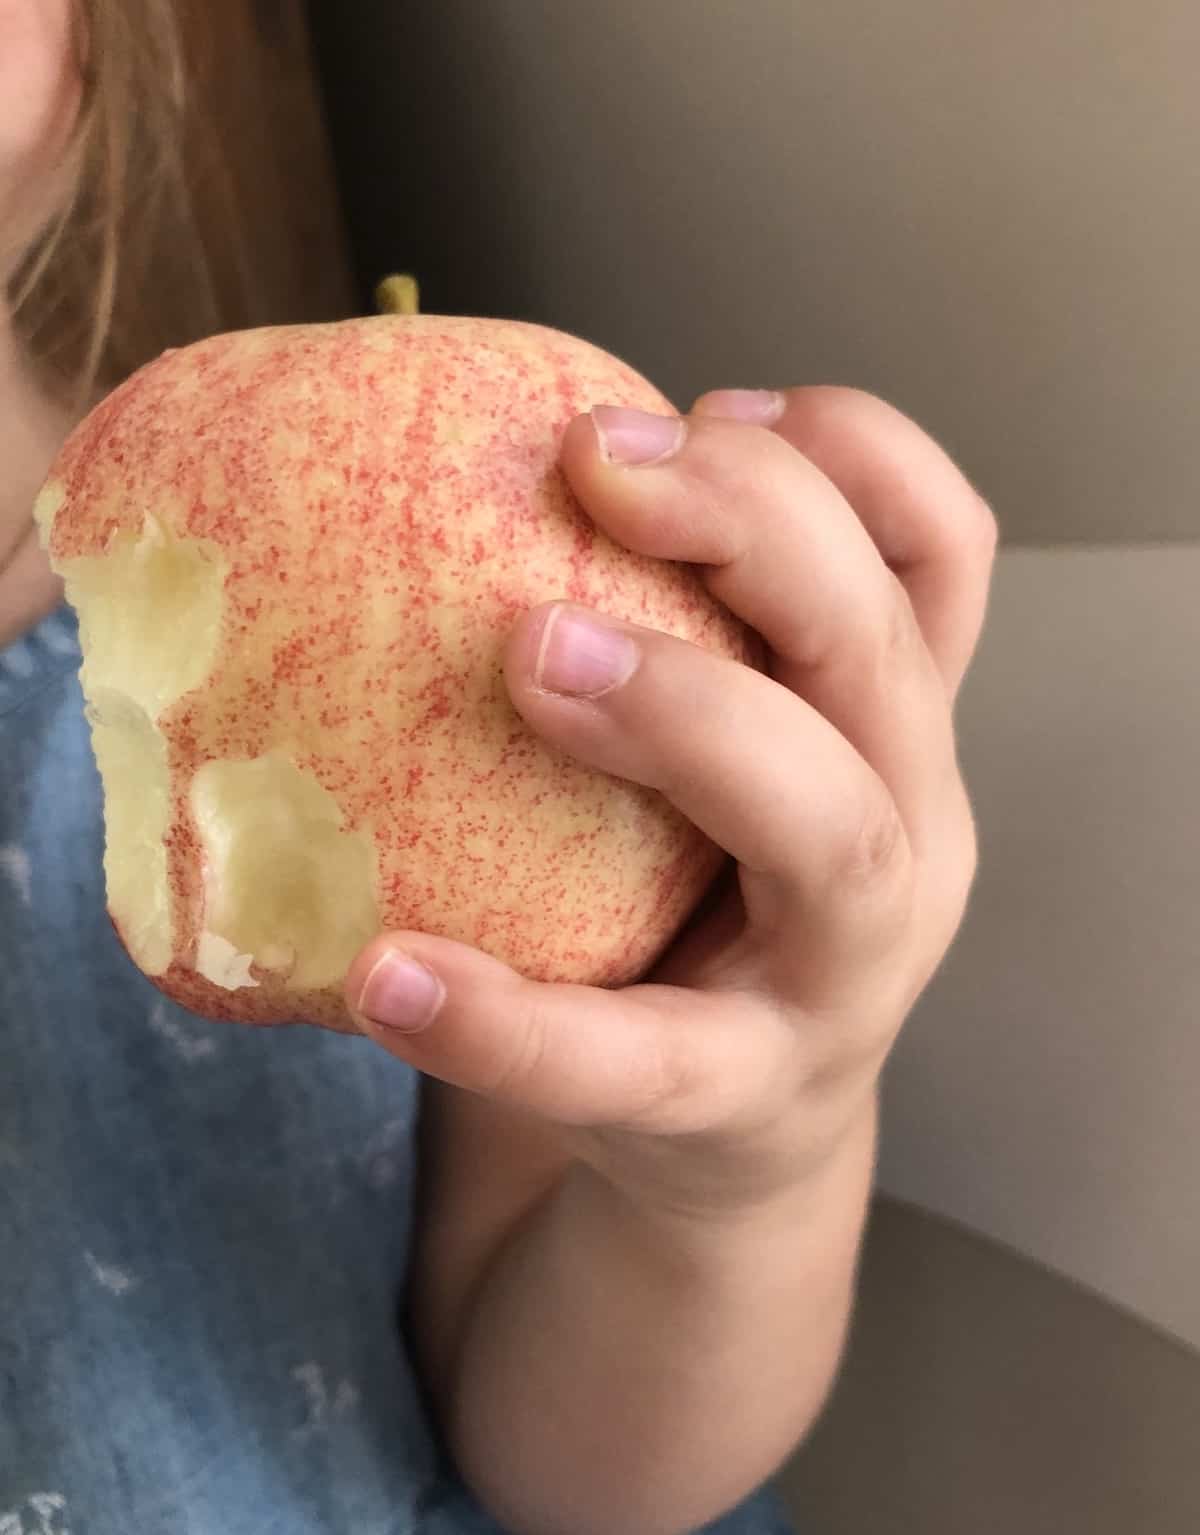 Gala apples are perfect for kids